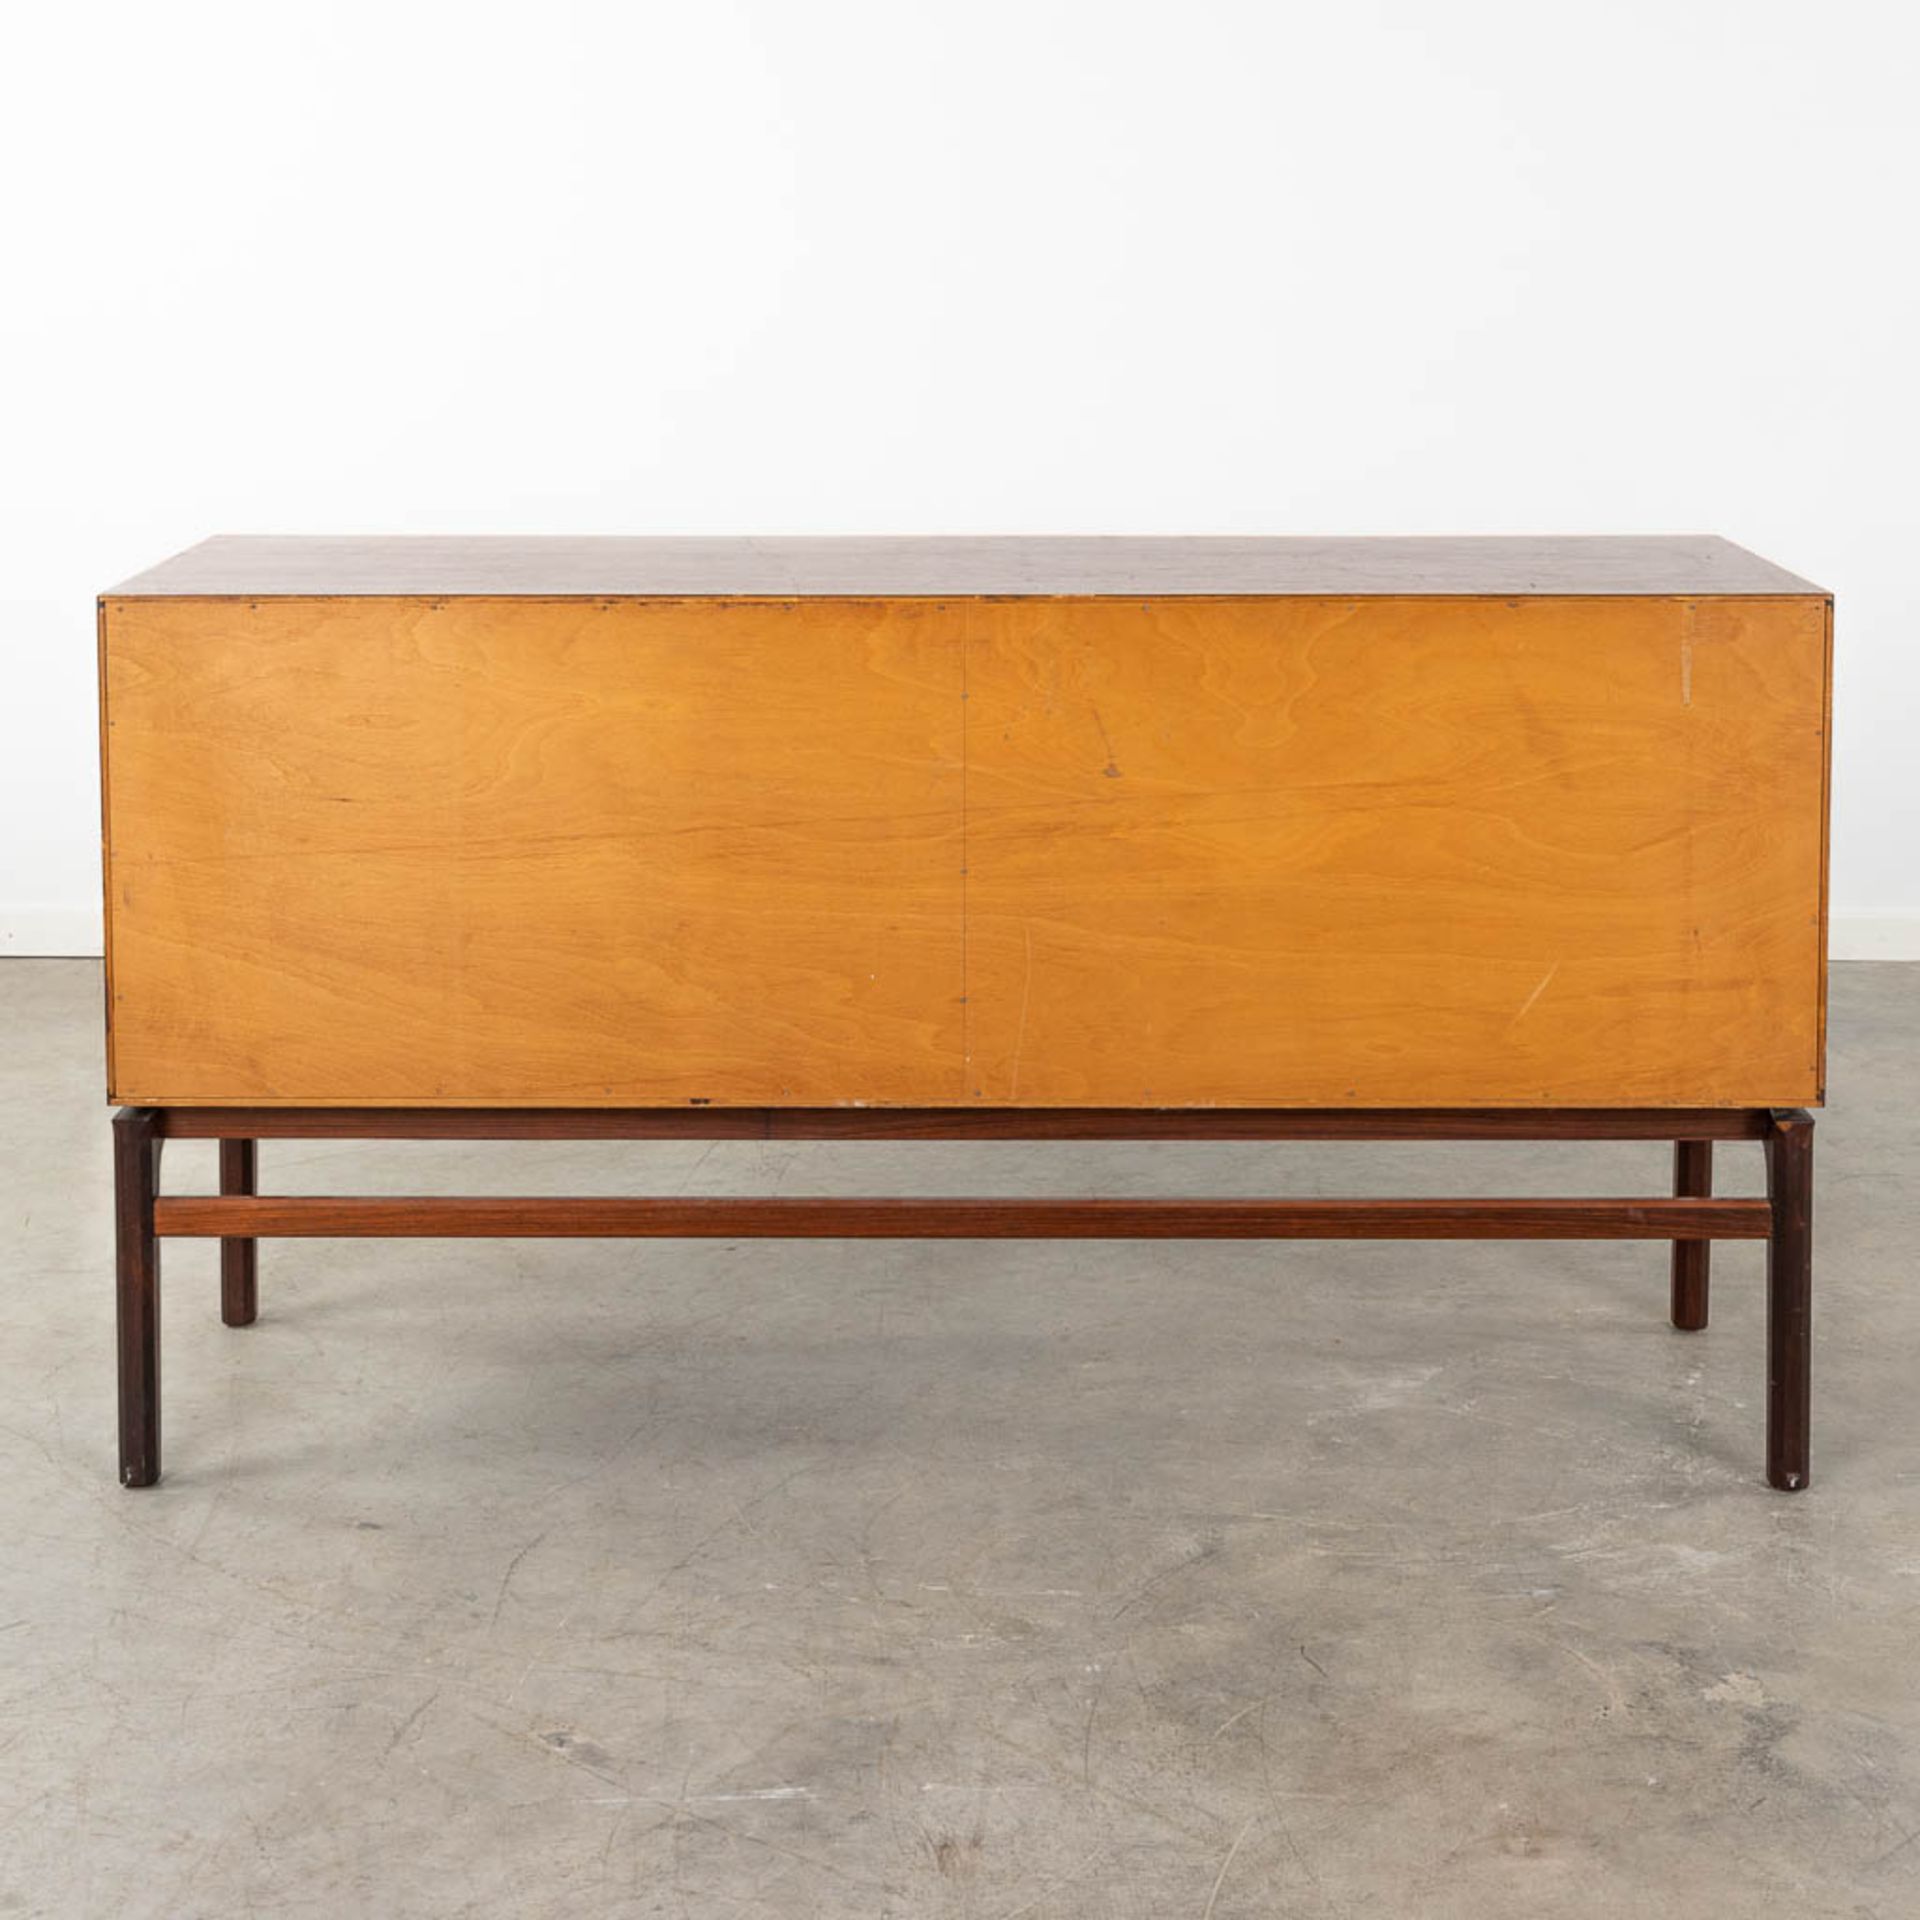 A mid-century Scandinavian Sideboard with 6 drawers, and rosewood veneer. (D:45 x W:150 x H:80 cm) - Image 6 of 12